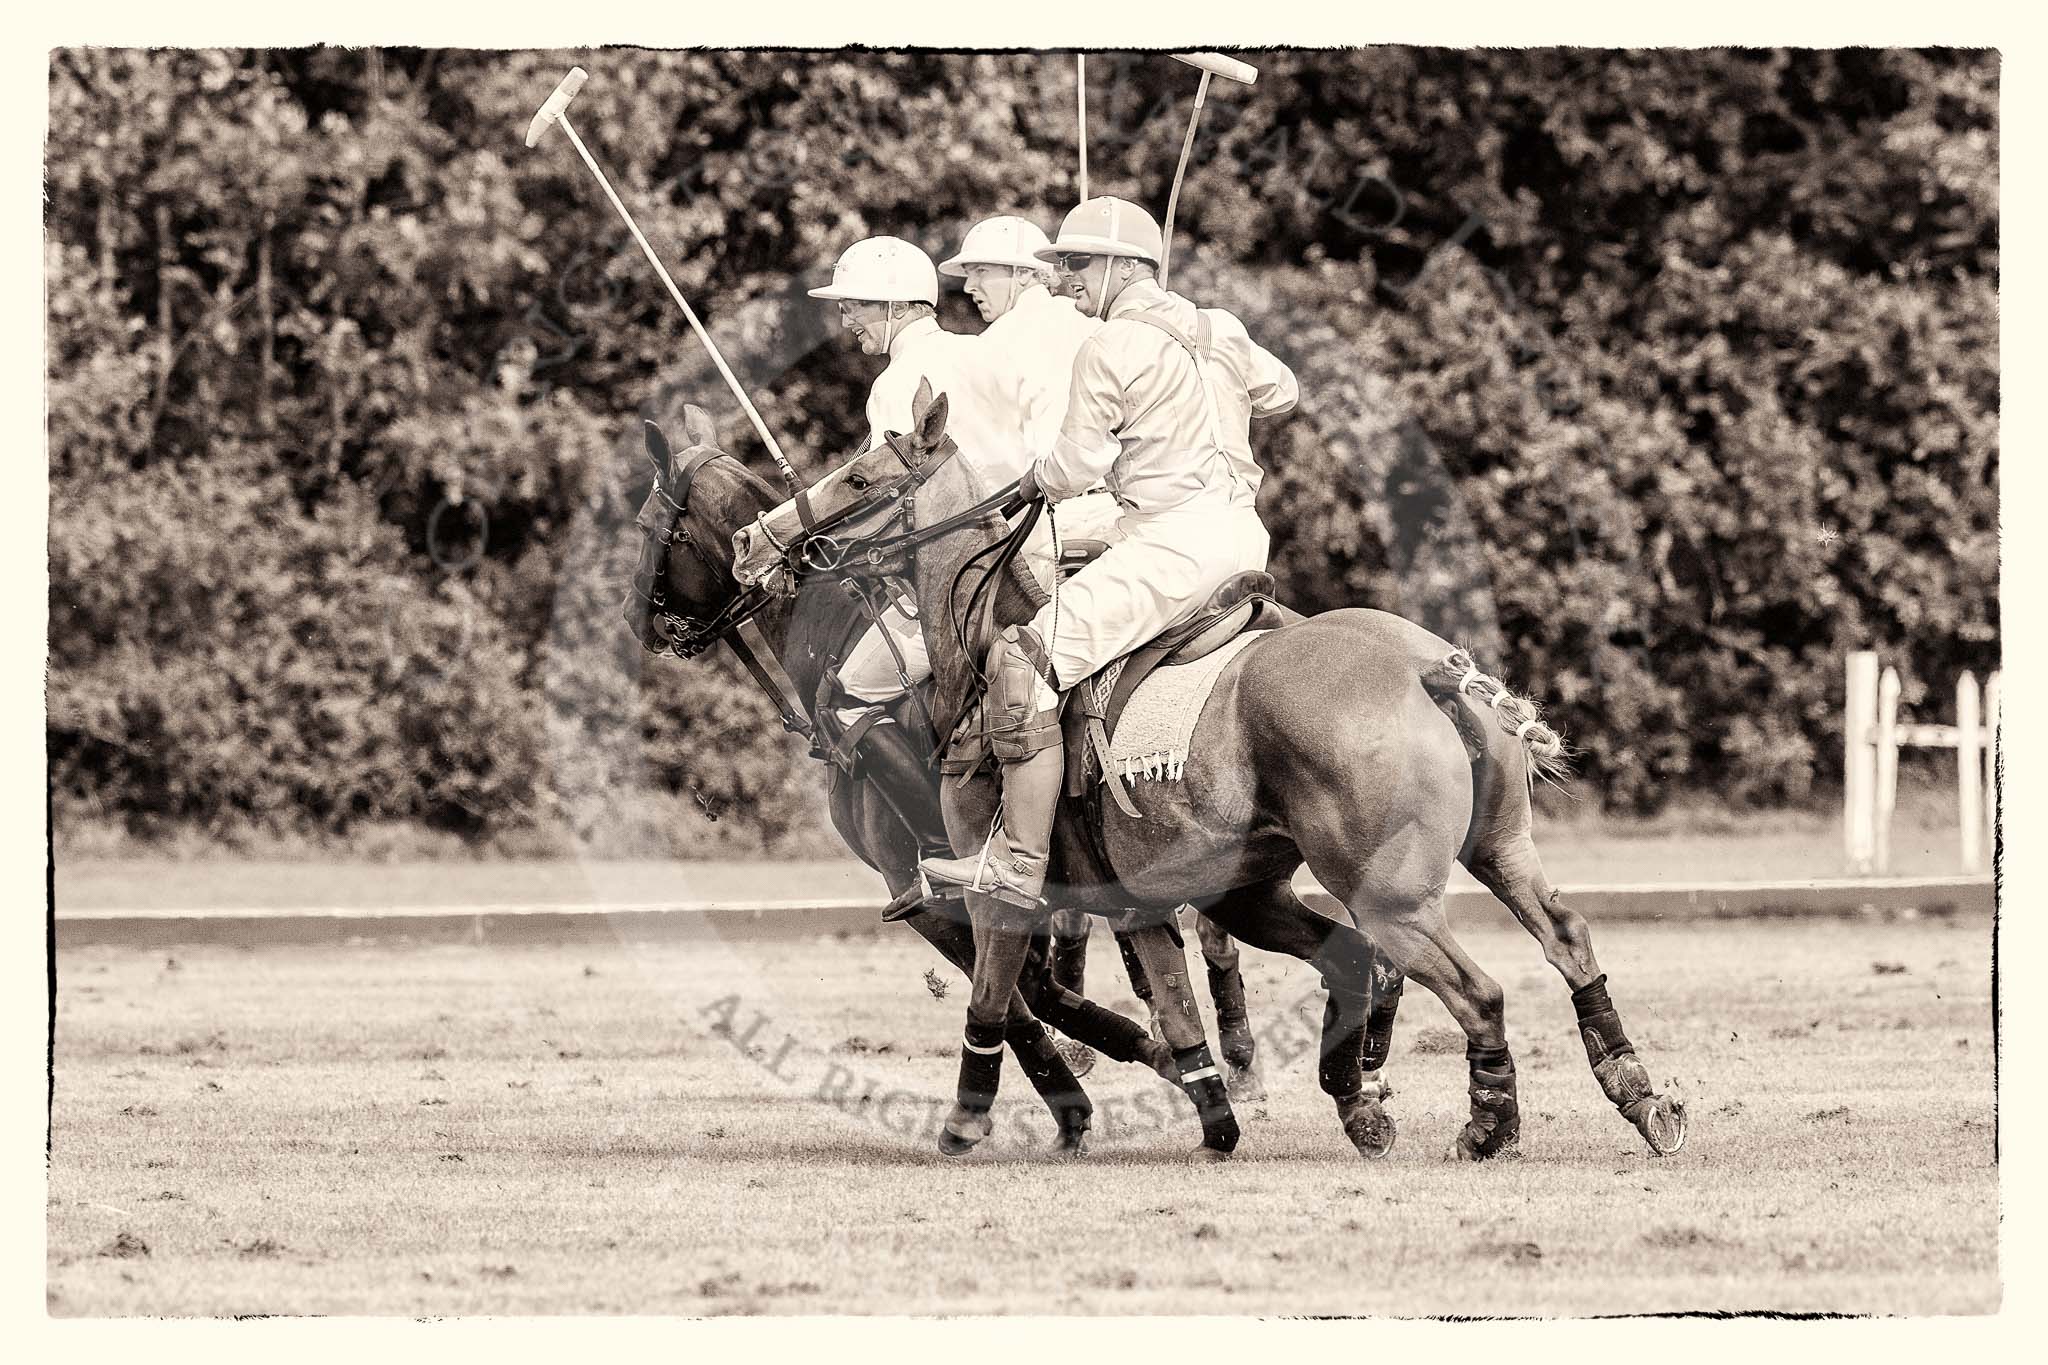 7th Heritage Polo Cup semi-finals: La Mariposa Argentina, Timothy Rose looking around..
Hurtwood Park Polo Club,
Ewhurst Green,
Surrey,
United Kingdom,
on 04 August 2012 at 16:15, image #320